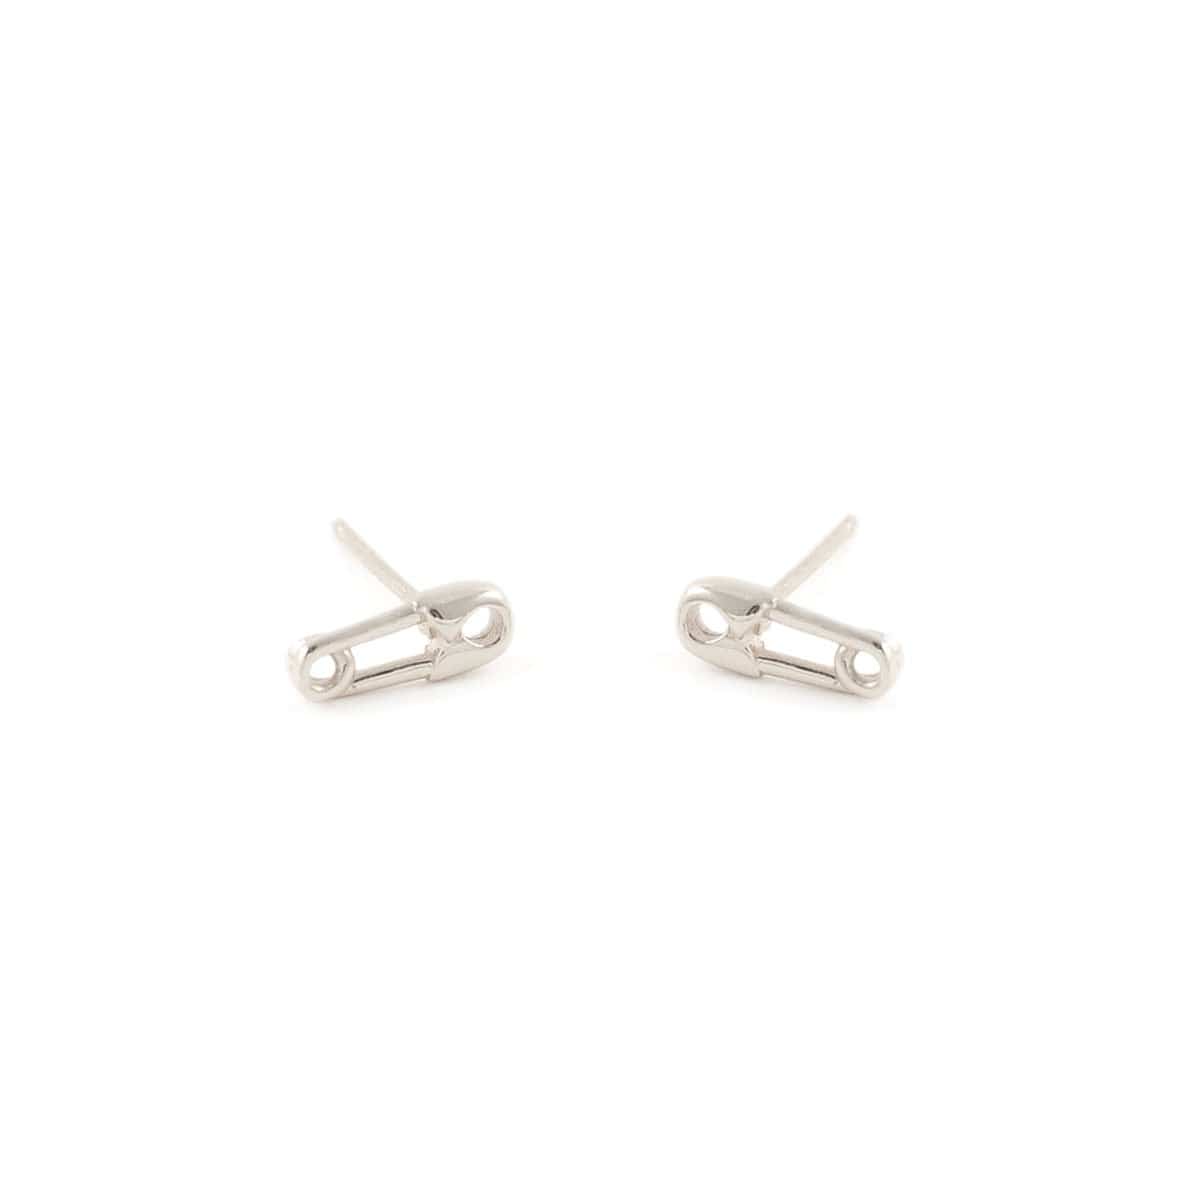 Safety Pin Stud Earrings